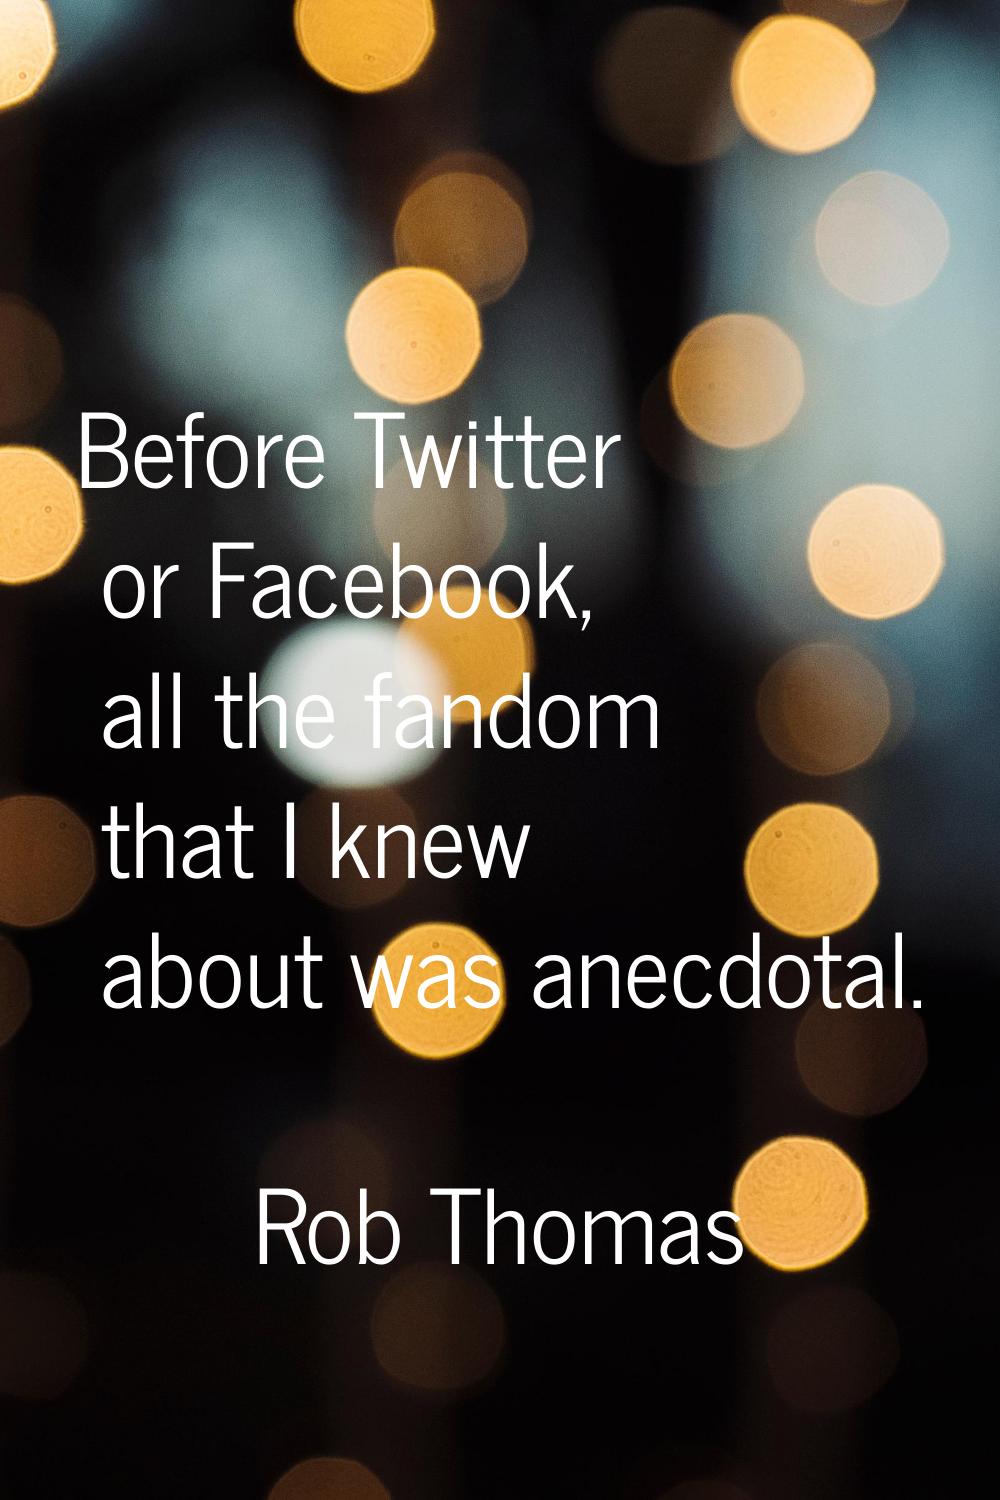 Before Twitter or Facebook, all the fandom that I knew about was anecdotal.